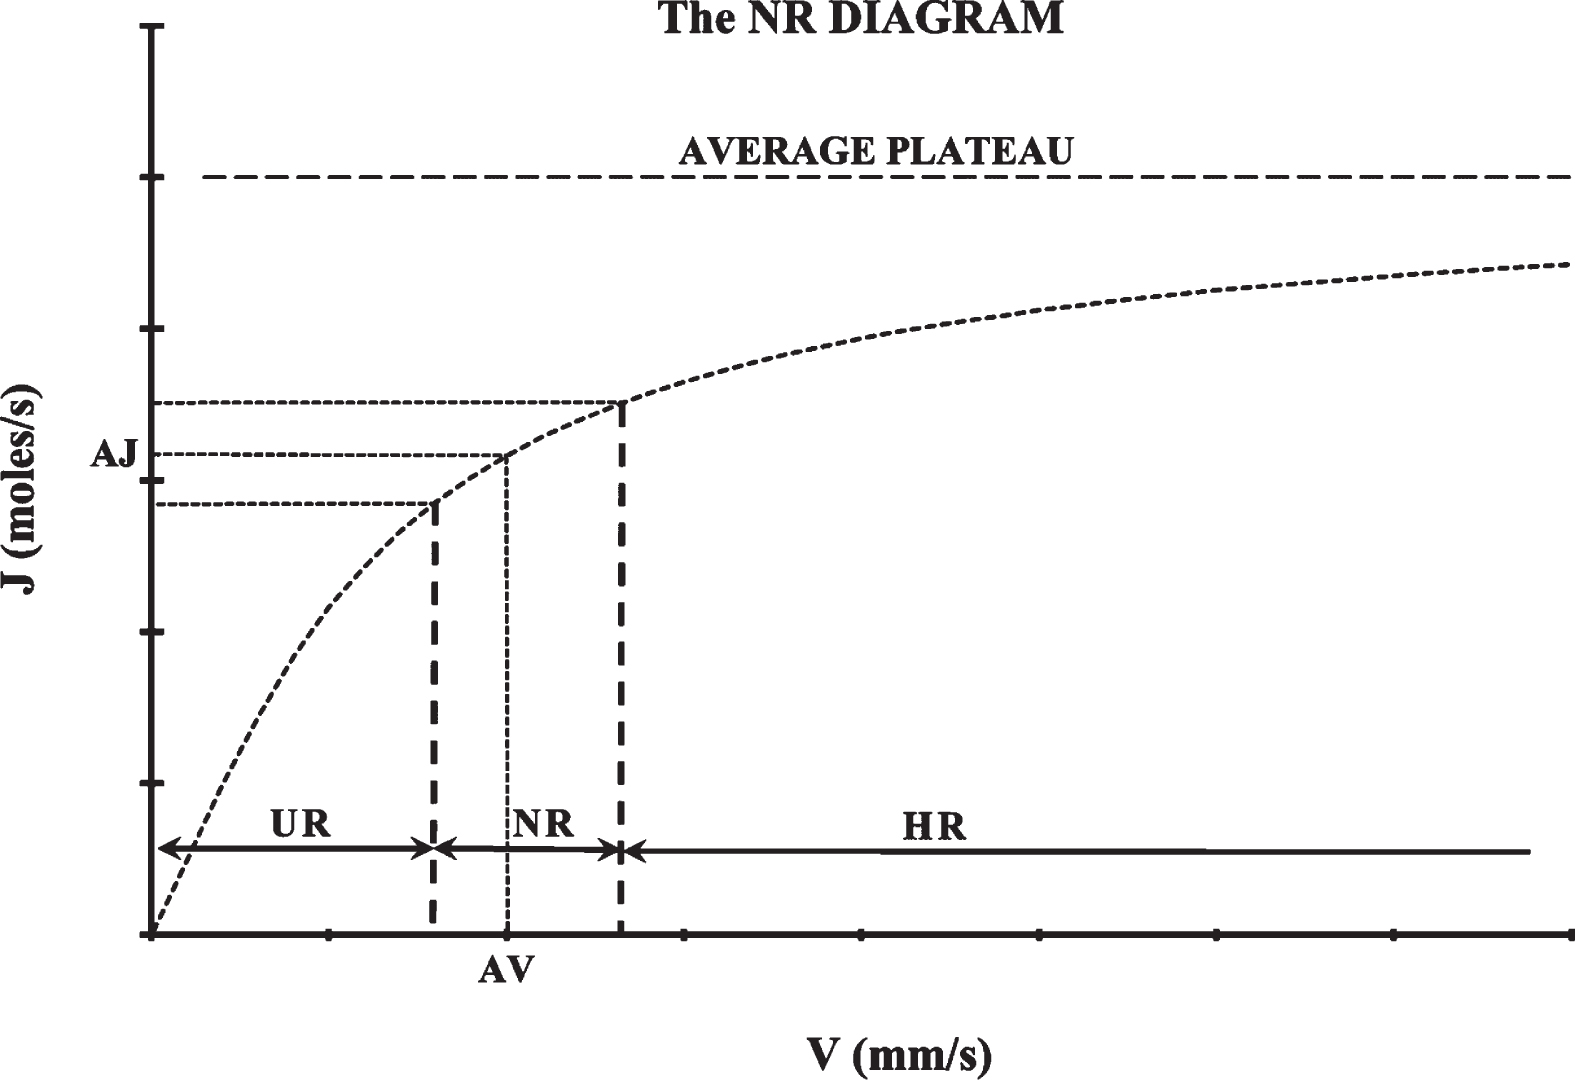 The normative range (NR) diagram. After measuring axial velocities at many microvessels with the same diameter, an average axial velocity (AV) can be estimated statistically which corresponds to an average mass diffusion rate (AJ). After measuring axial velocities at many persons, a normative range (NR) can be determined statistically comprising average axial velocity values of normal, equilibrium resting conditions. UR stands for “Underemic Range” and is the range of average axial velocities corresponding to underemic conditions. HR stands for “Hyperemic Range” and is the range of average axial velocities corresponding to hyperemic conditions.